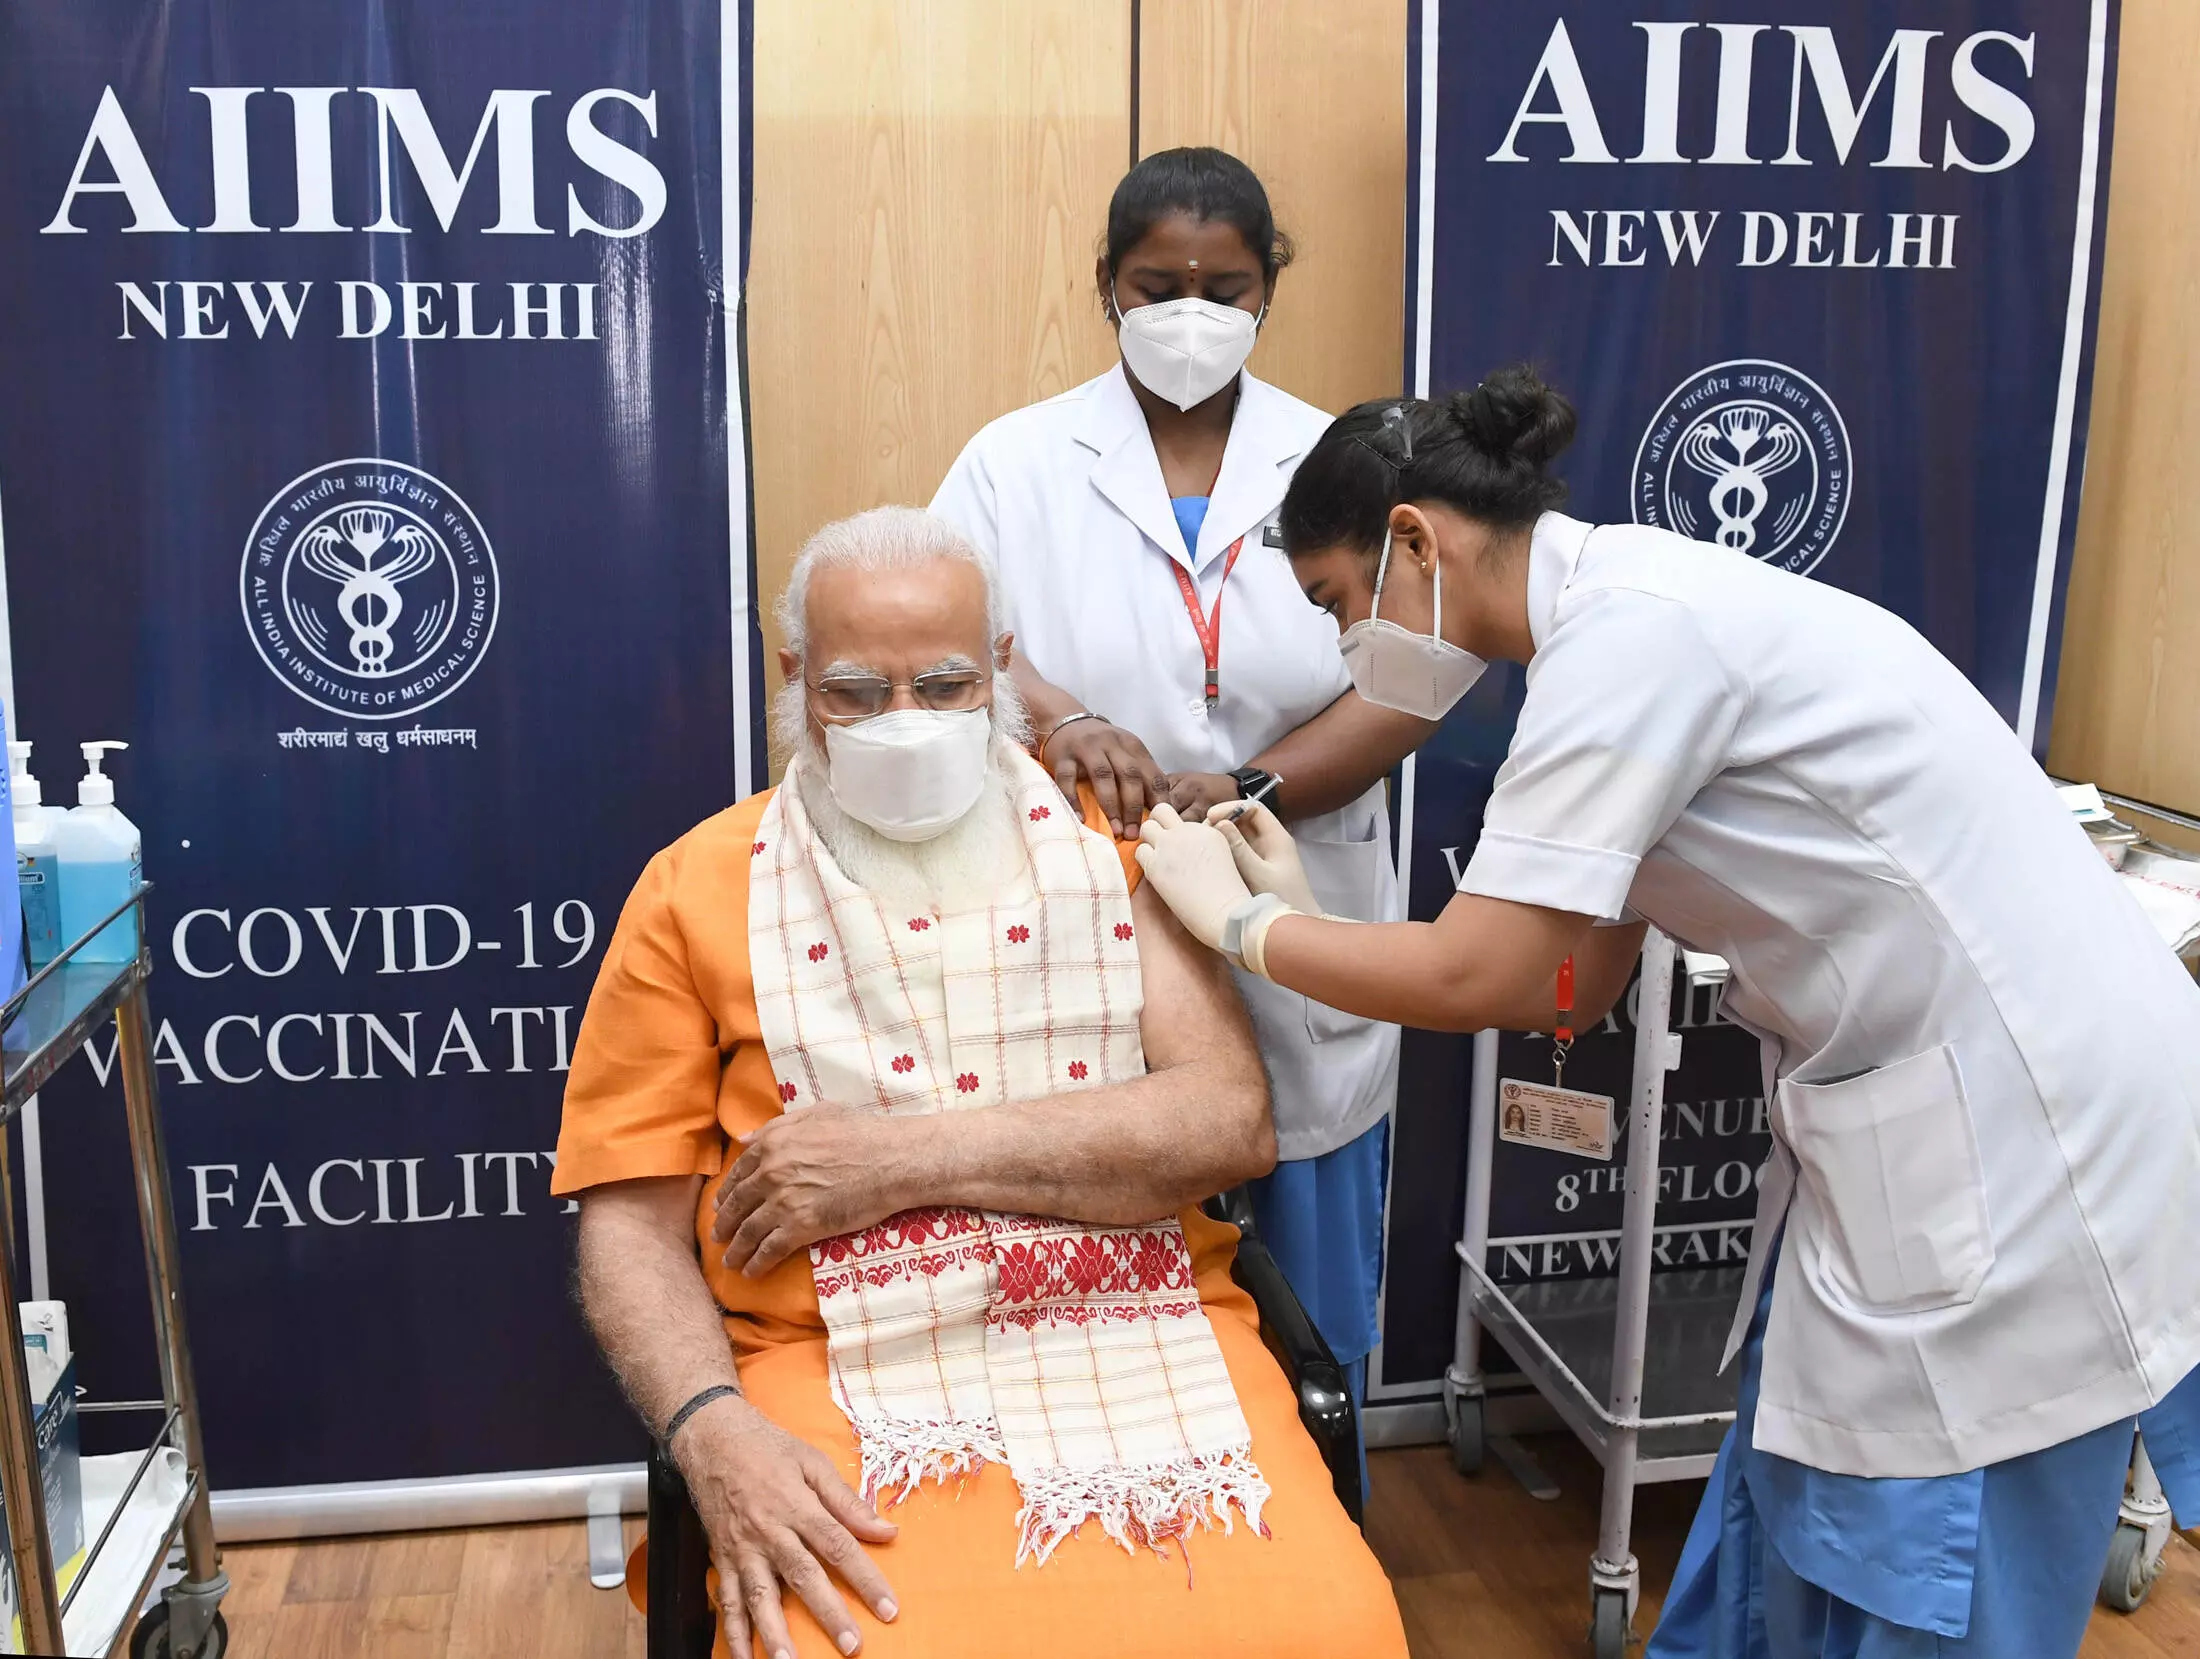 PM Modi takes 2nd dose of Covid-19 vaccine at AIIMS, asks all eligible people to get inoculated